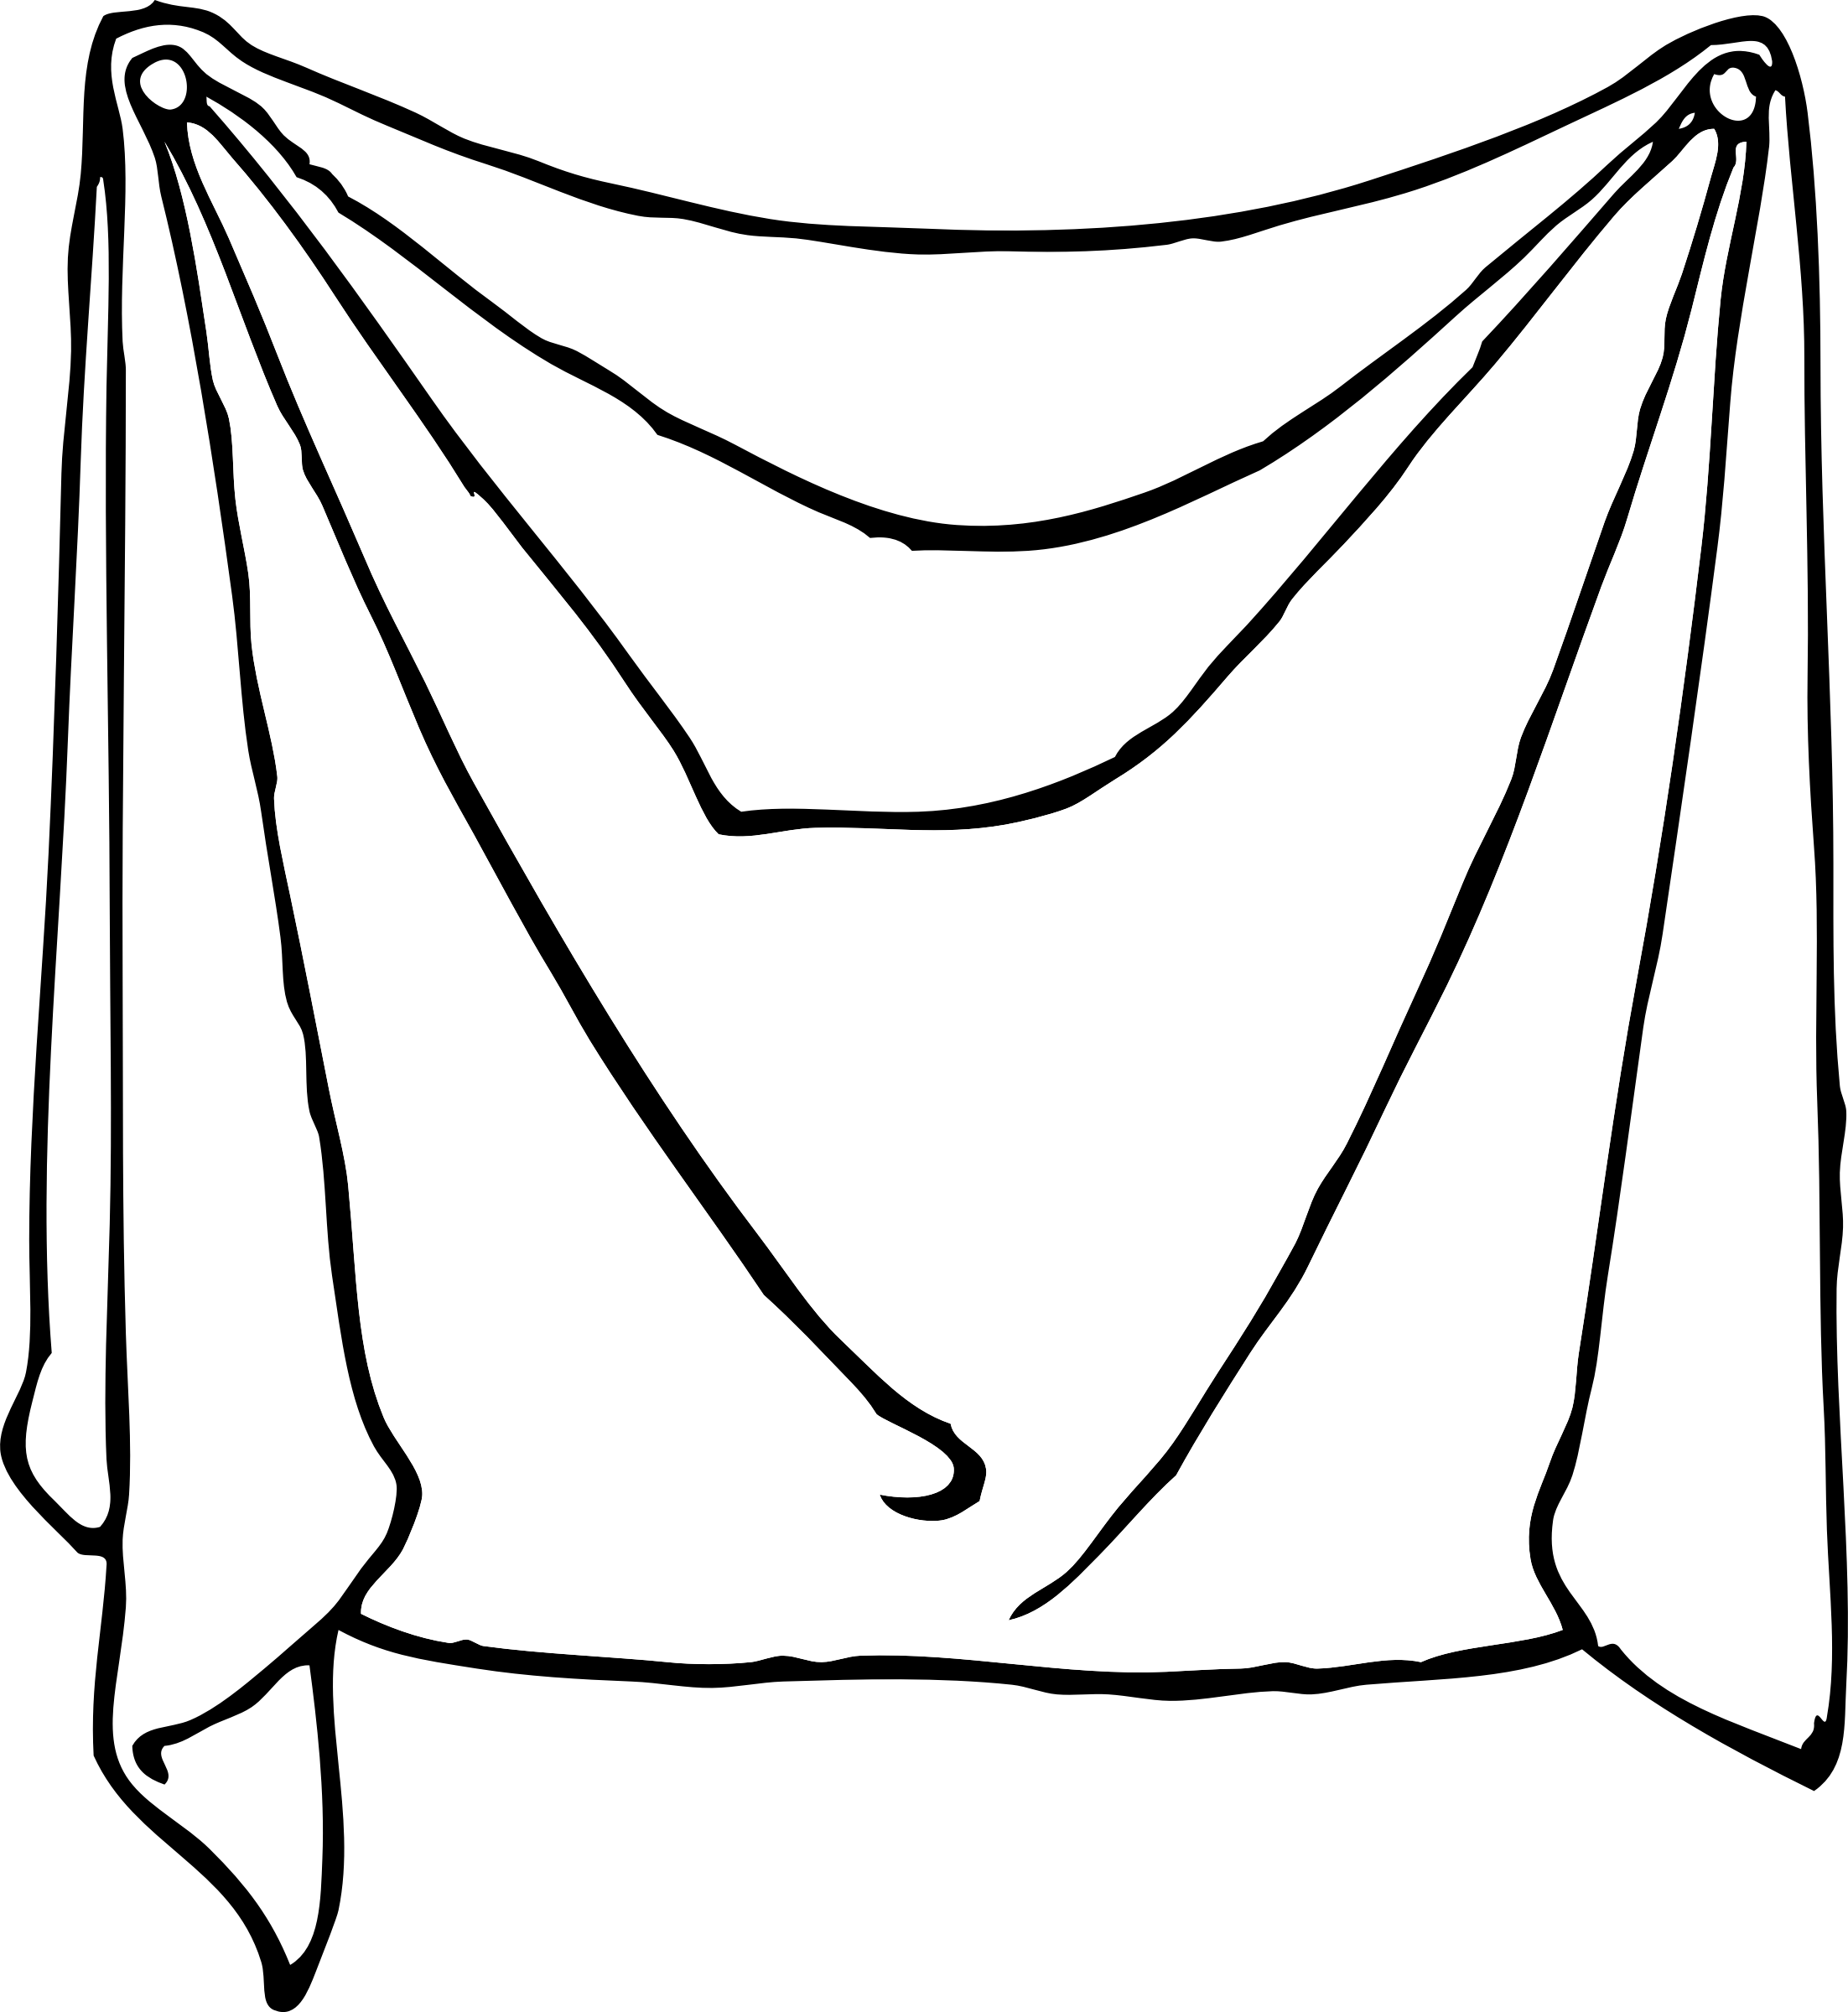 clipart bed bed outline